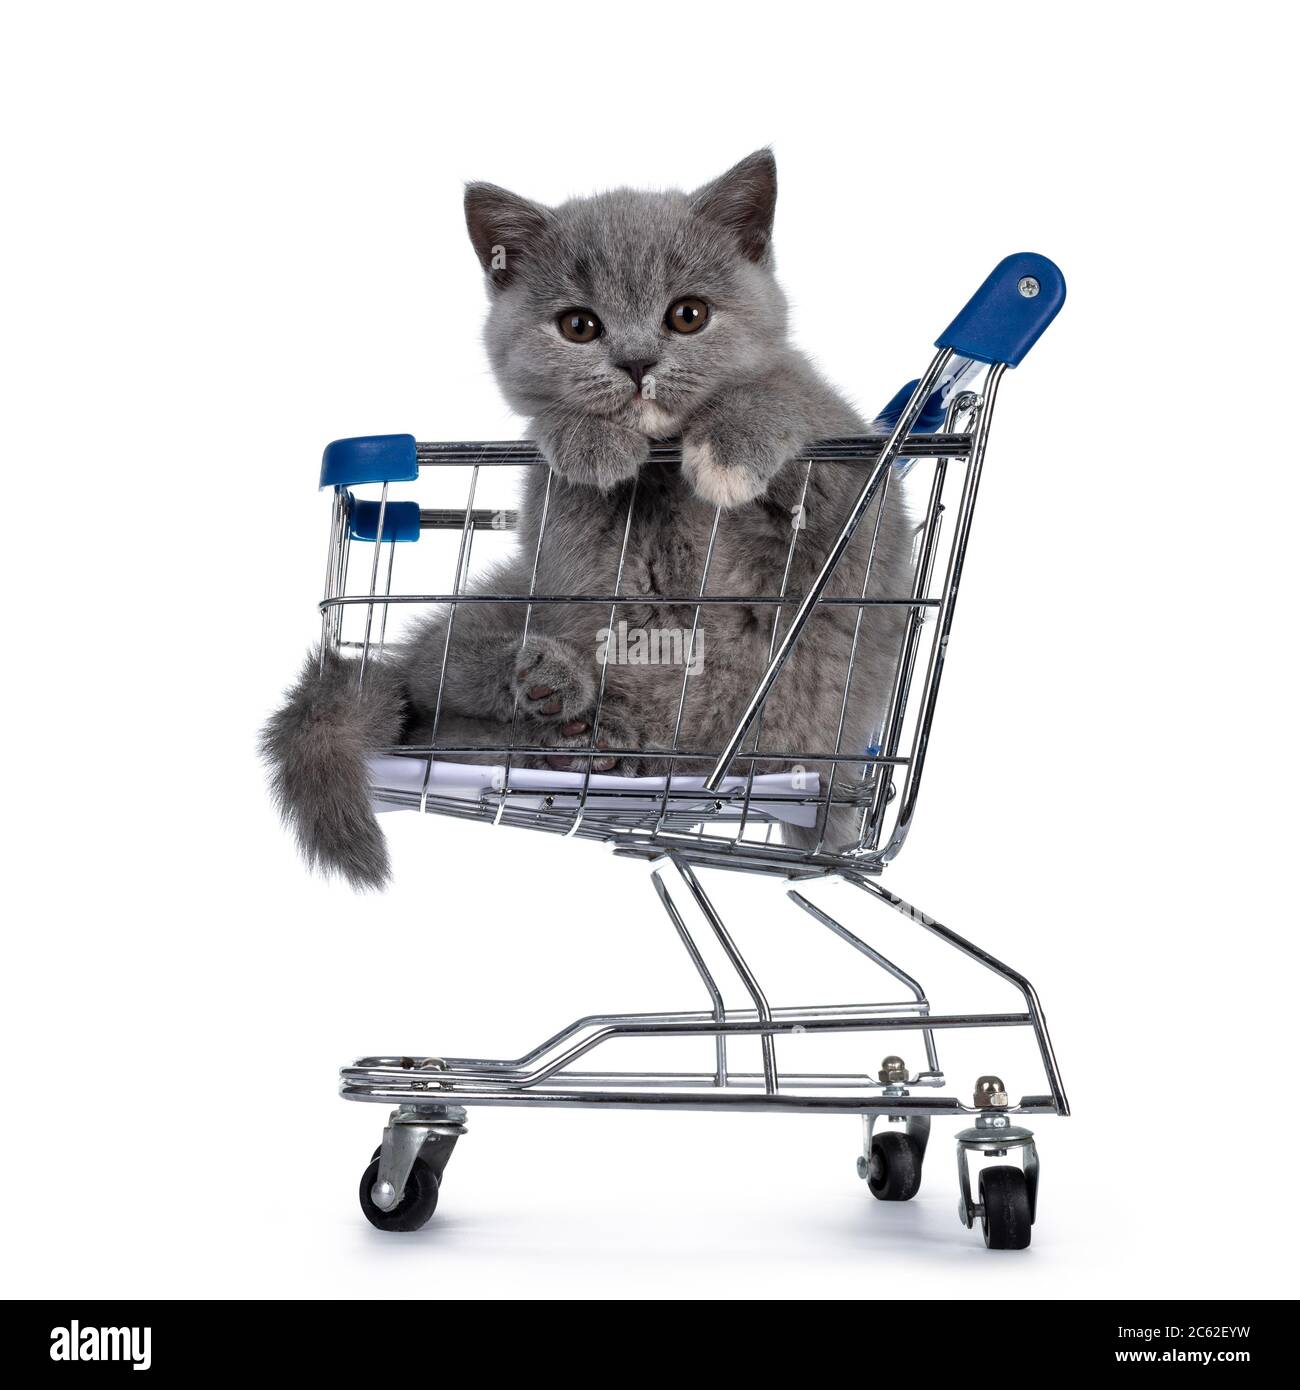 Cute small blue tortie British Shorthair cat kitten, hanging in mini shopping cart. Paws over edge and looking towards camera with brown eyes. Isolate Stock Photo